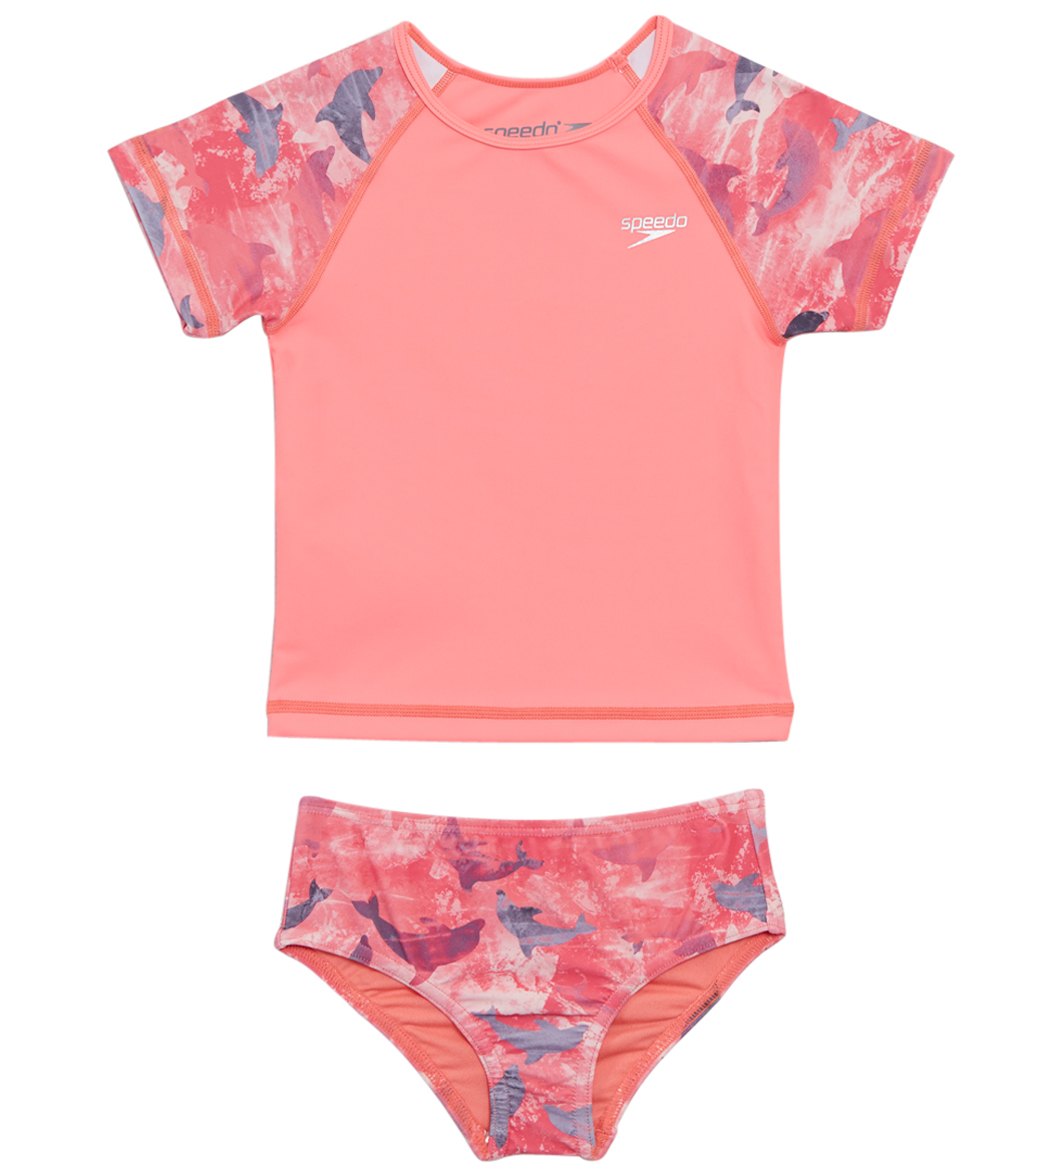 Speedo Girls' Learn To Swim Printed Short Sleeve Rash Guard Two Piece Set 12 Months-3T - Coral 12 Months Polyester/Spandex - Swimoutlet.com